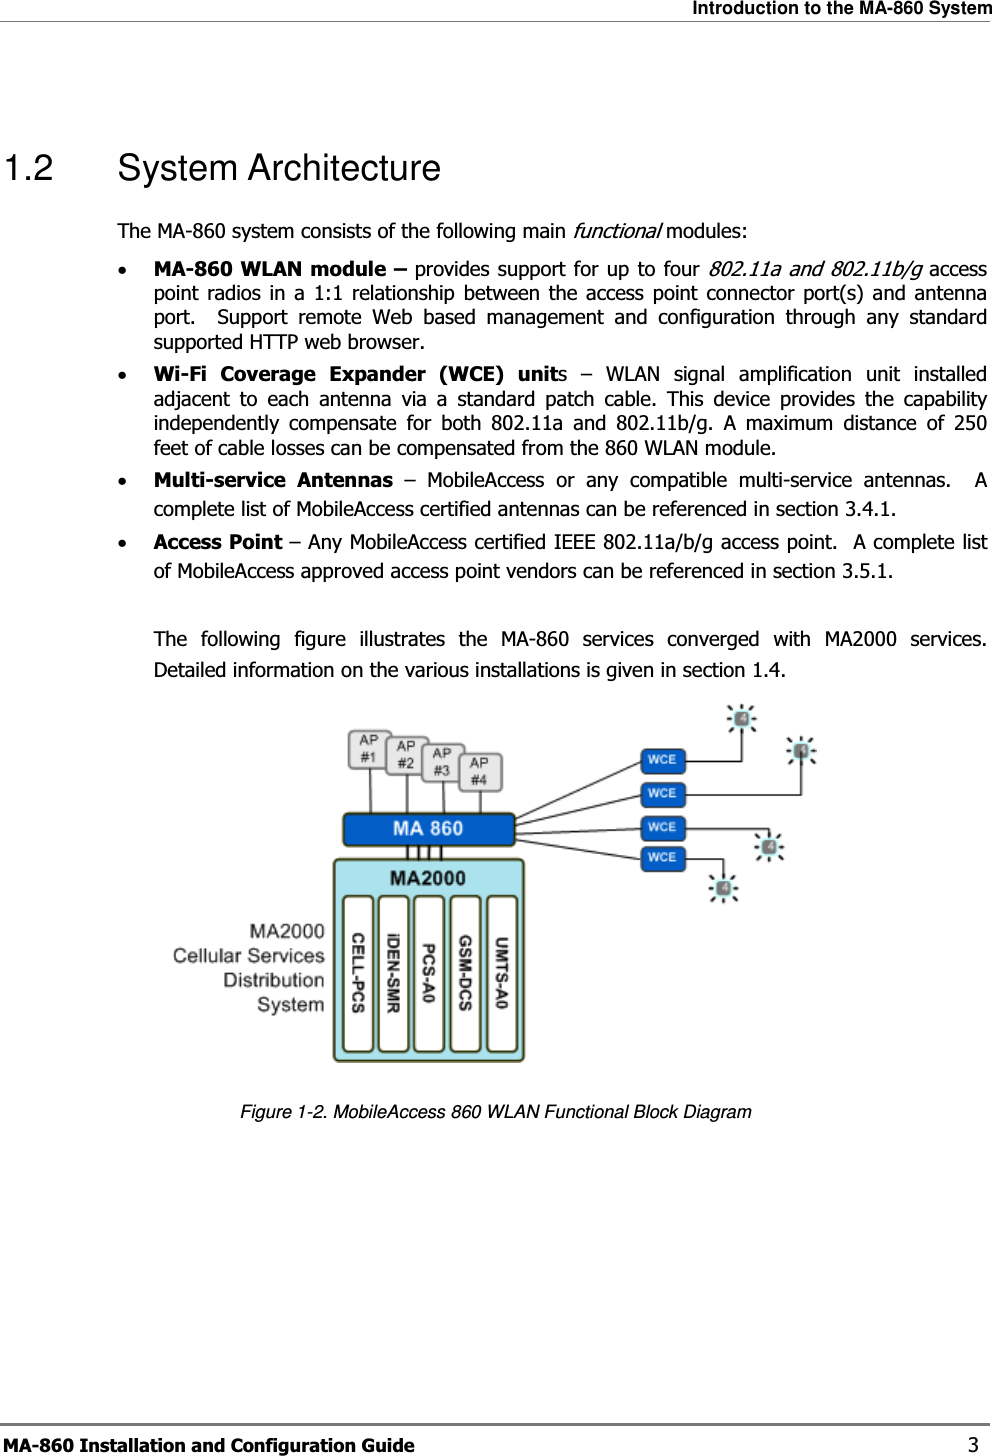 Introduction to the MA-860 System MA-860 Installation and Configuration Guide    3   1.2 System Architecture The MA-860 system consists of the following main functional modules: •MA-860 WLAN module – provides support for up to four 802.11a and 802.11b/g access point radios in a 1:1 relationship between the access point connector port(s) and antenna port.  Support remote Web based management and configuration through any standard supported HTTP web browser.  •Wi-Fi Coverage Expander (WCE) units – WLAN signal amplification unit installed adjacent to each antenna via a standard patch cable. This device provides the capability independently compensate for both 802.11a and 802.11b/g. A maximum distance of 250 feet of cable losses can be compensated from the 860 WLAN module. •Multi-service Antennas – MobileAccess or any compatible multi-service antennas.  A complete list of MobileAccess certified antennas can be referenced in section  3.4.1.  •Access Point – Any MobileAccess certified IEEE 802.11a/b/g access point.  A complete list of MobileAccess approved access point vendors can be referenced in section  3.5.1.  The following figure illustrates the MA-860 services converged with MA2000 services. Detailed information on the various installations is given in section  1.4.   Figure  1-2. MobileAccess 860 WLAN Functional Block Diagram